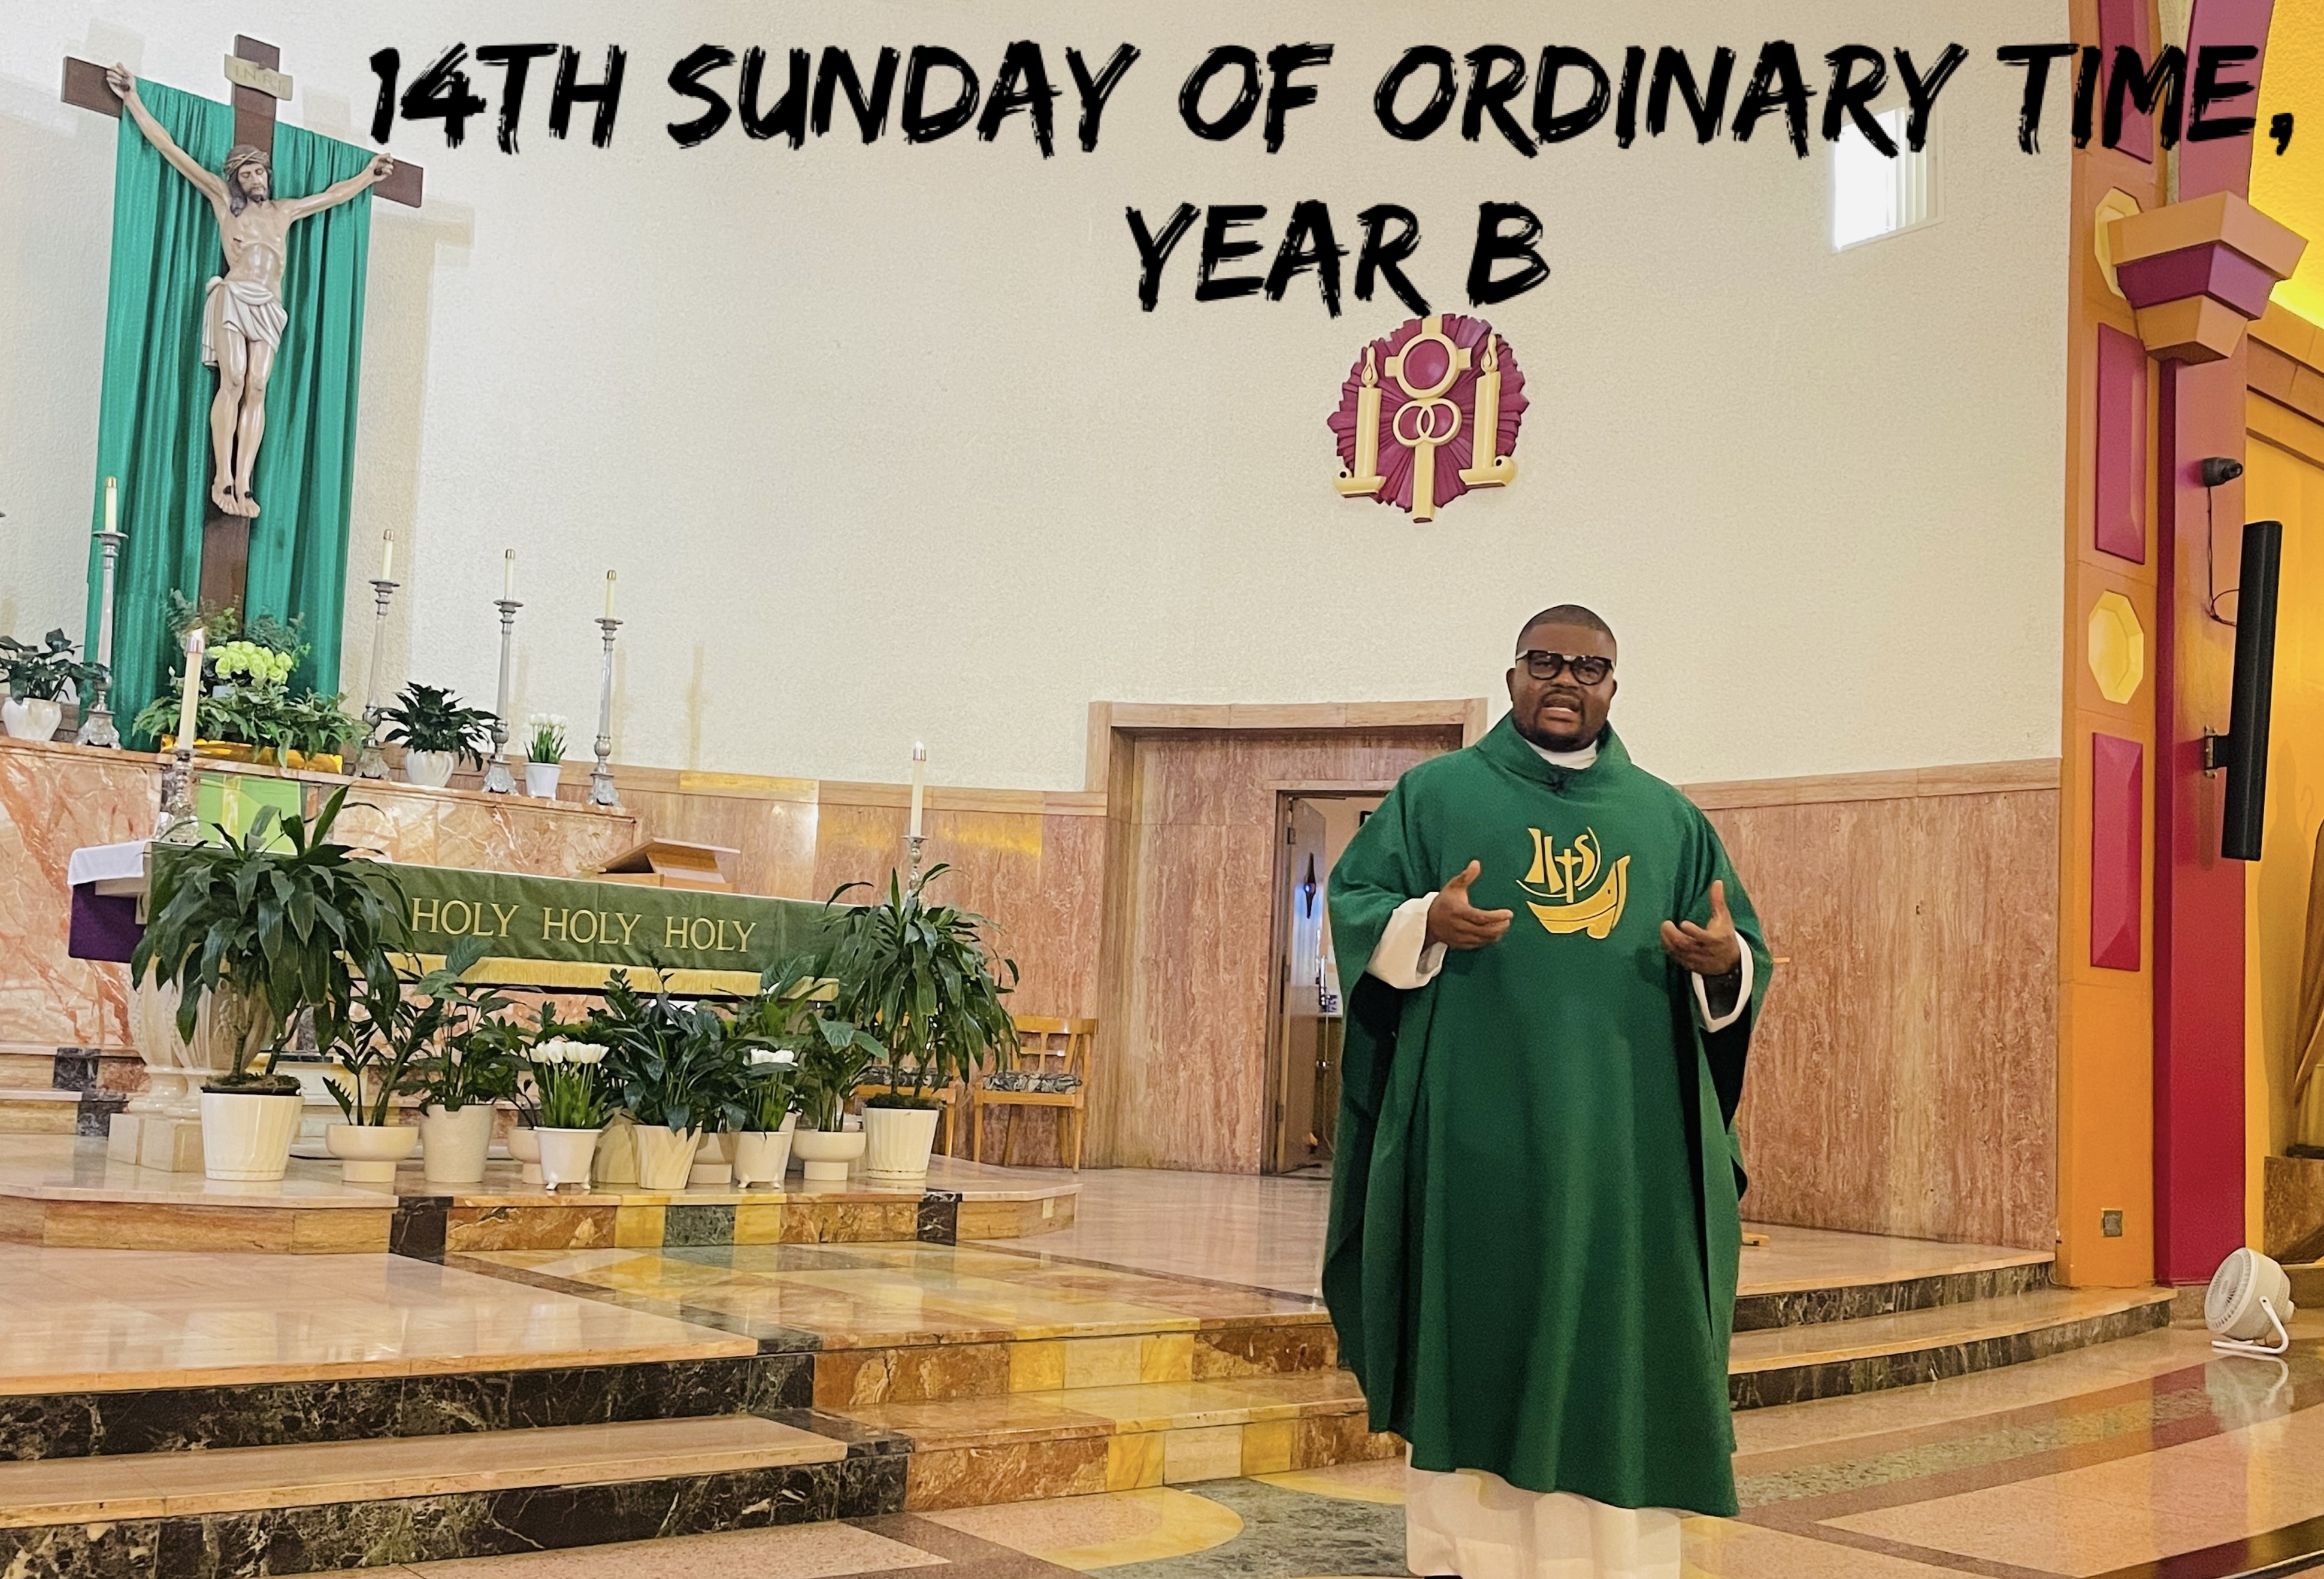 14th Sunday of Ordinary Time, Year B